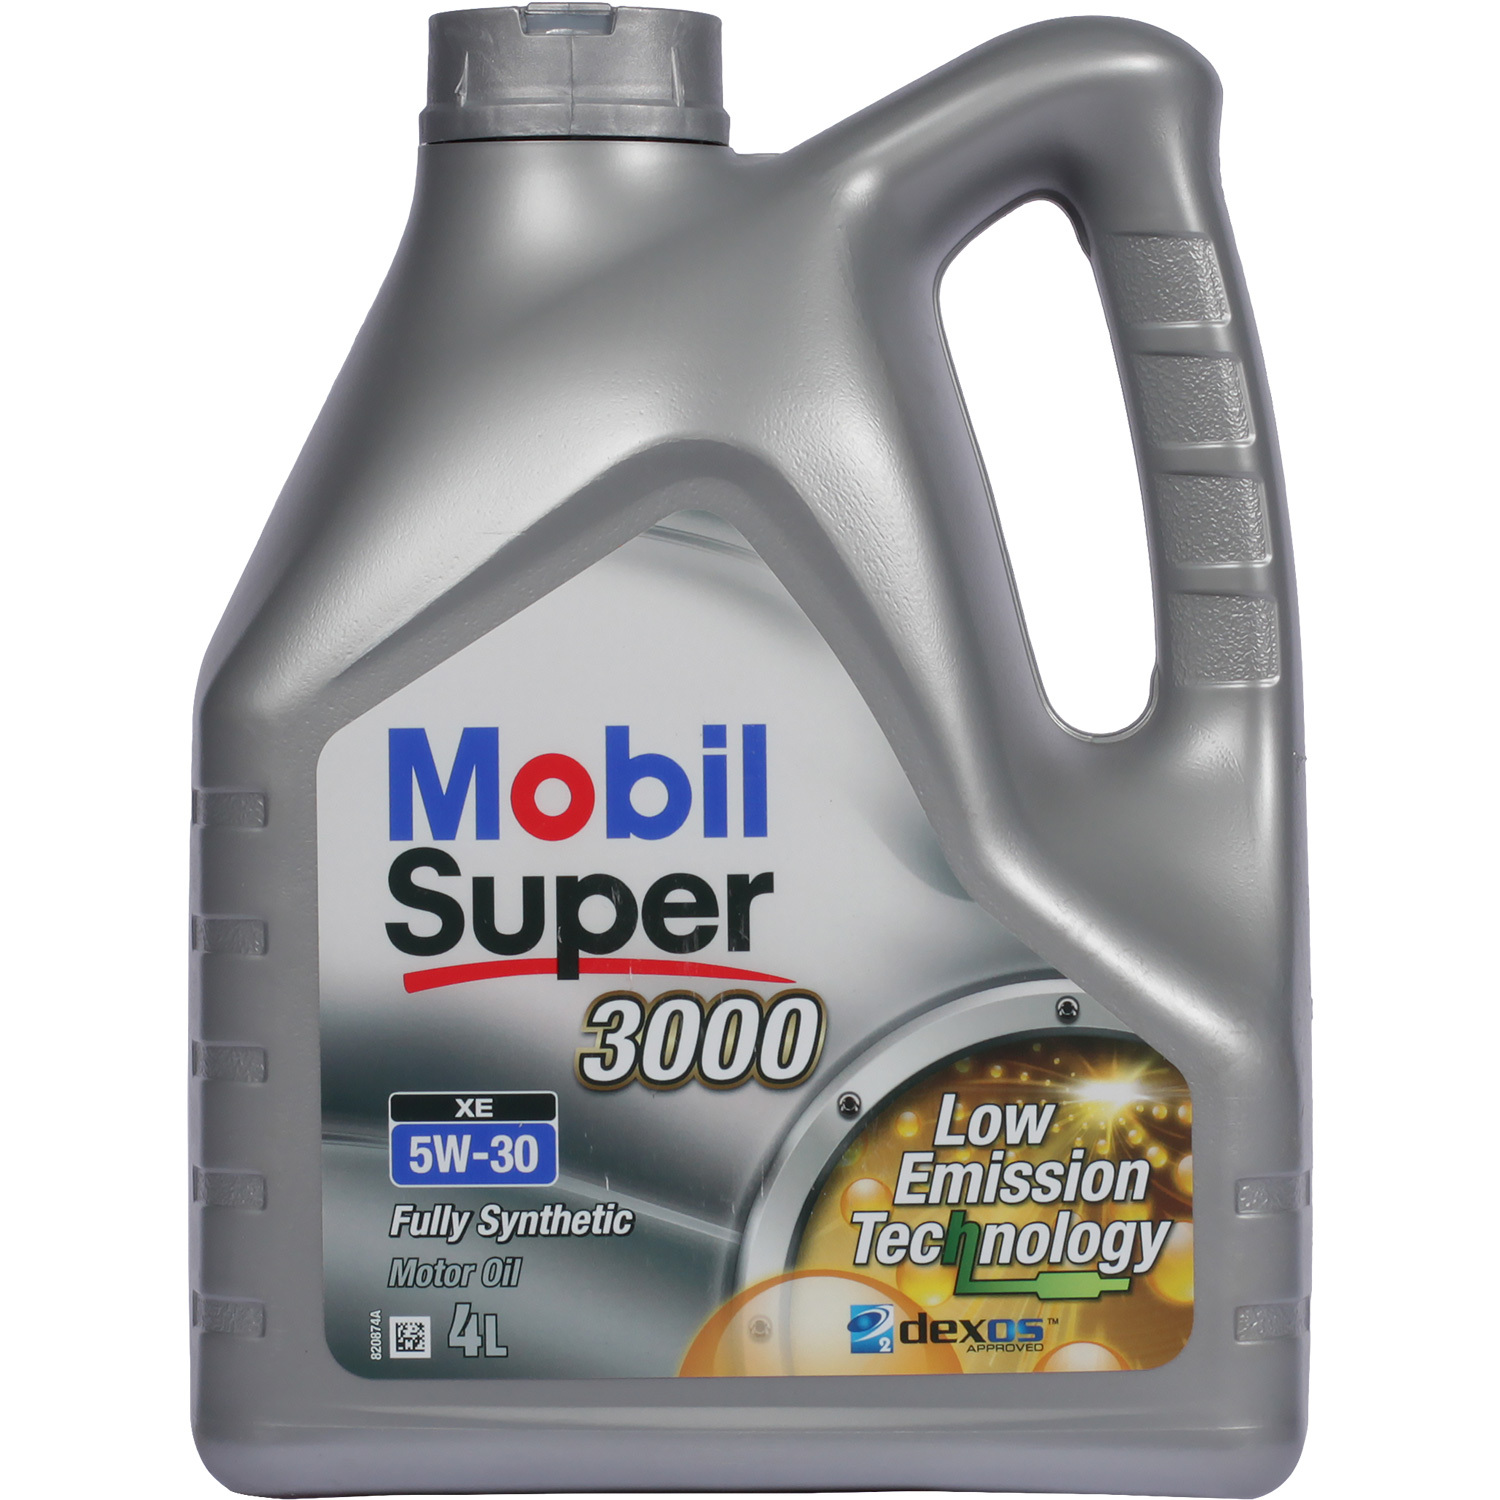 Mobil Моторное масло Mobil Super 3000 XE 5W-30, 4 л масло моторное mobil 1 esp 5w 30 4л